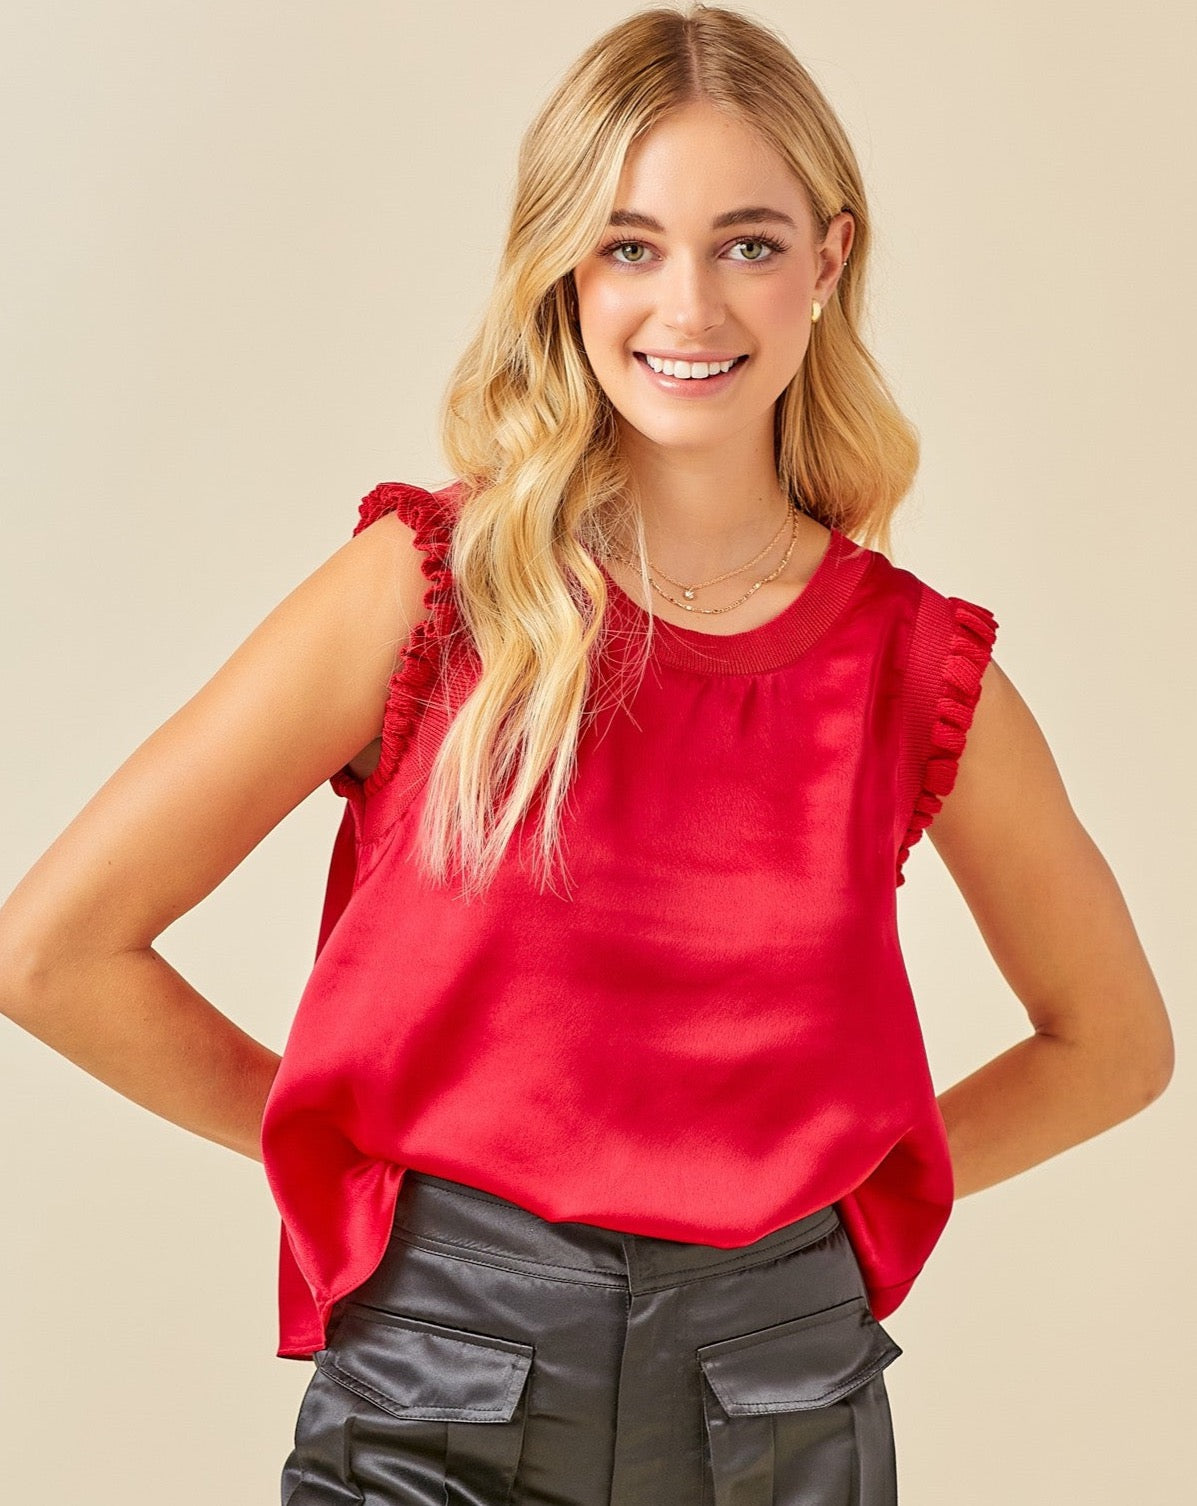 Game Day Ruffle Top (3 Colors!) SALE